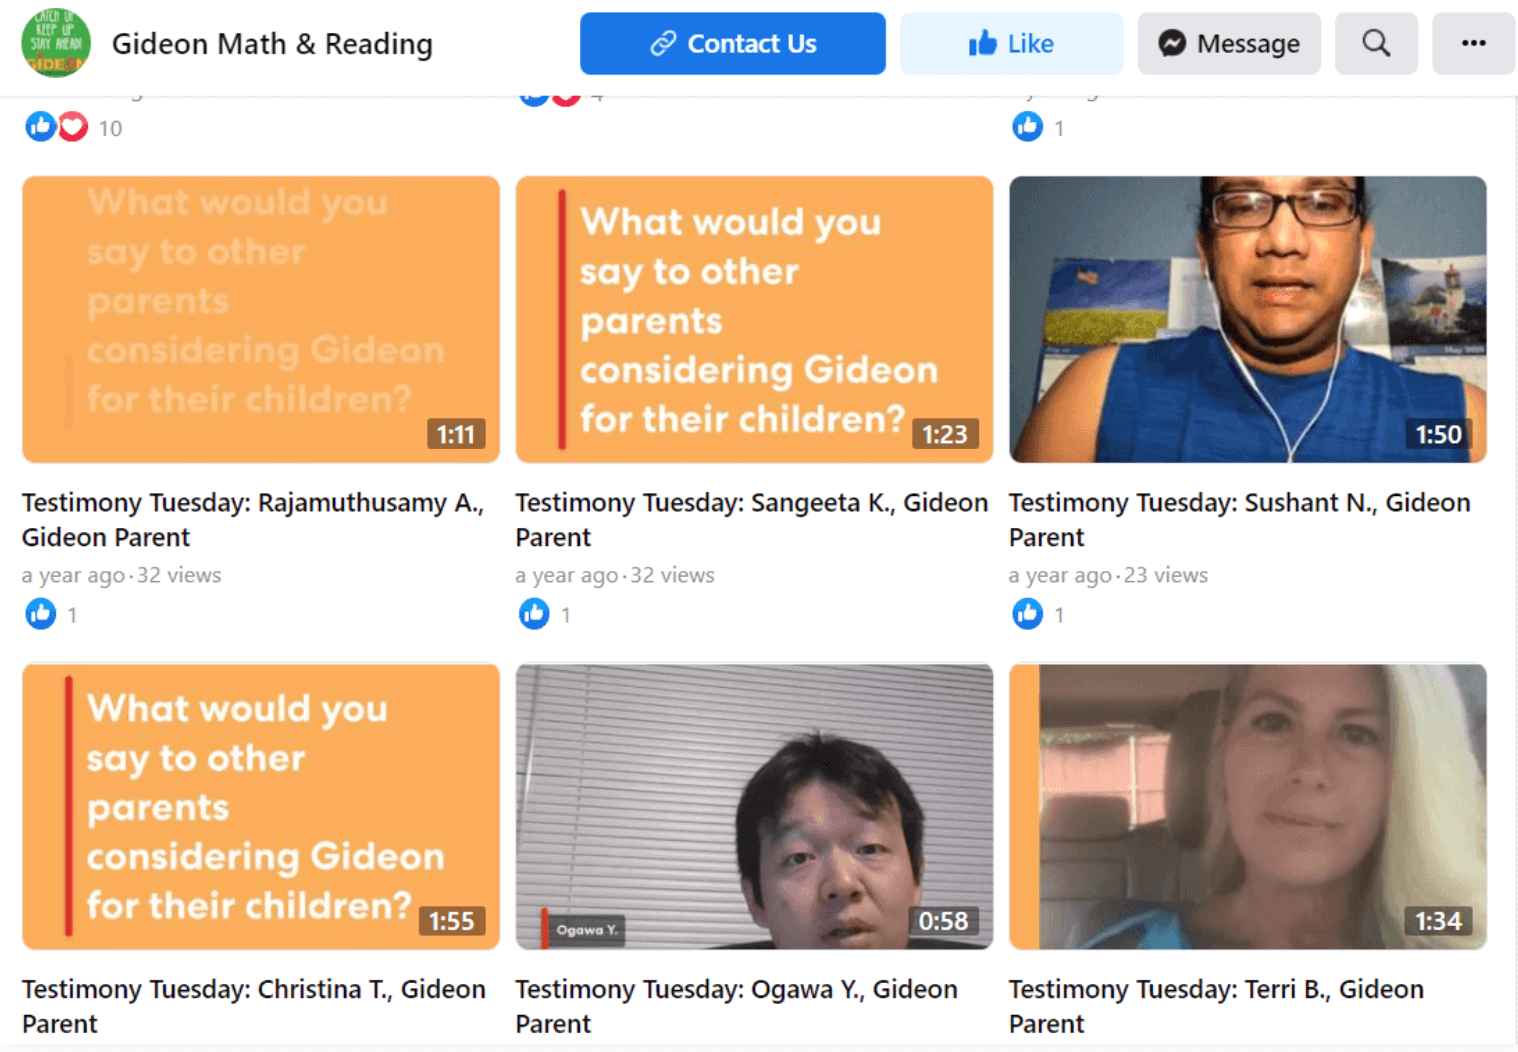 Tutoring company Gideon Math and Reading put out a general call for reviews and testimonials on their Facebook page (by posting a Vocal Video collector link directly in a post).